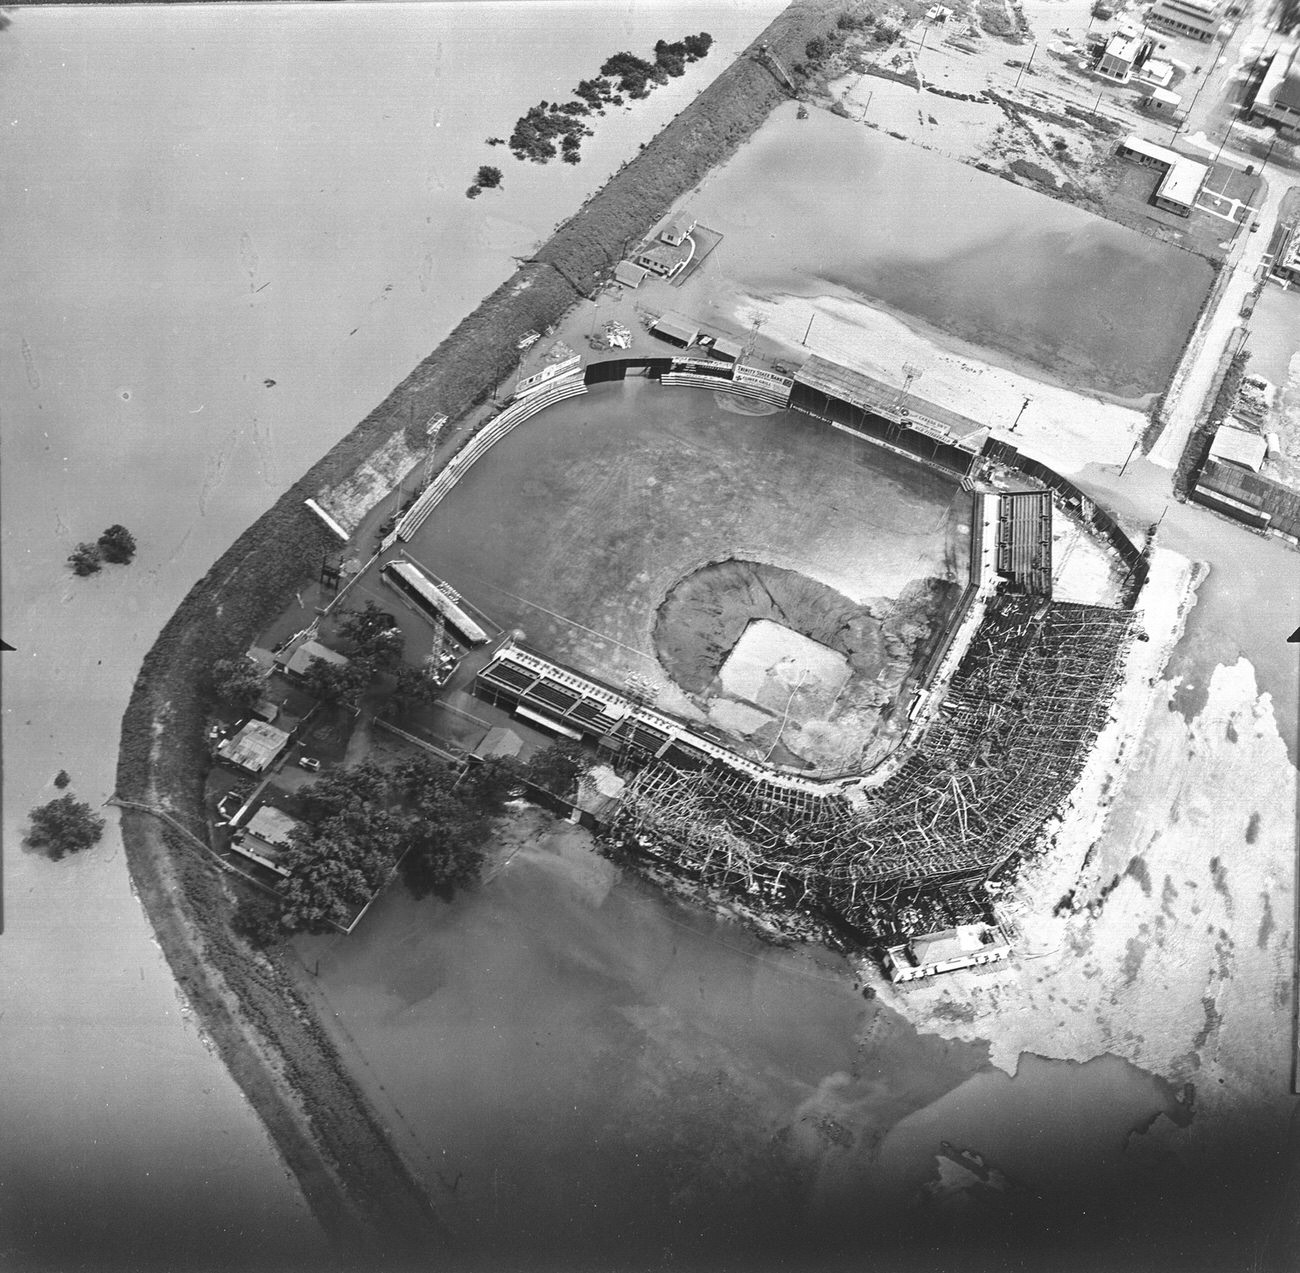 Flooding along North Main St., Fort Worth, aerial of flooded LaGrave Field, Cats baseball park, 1949